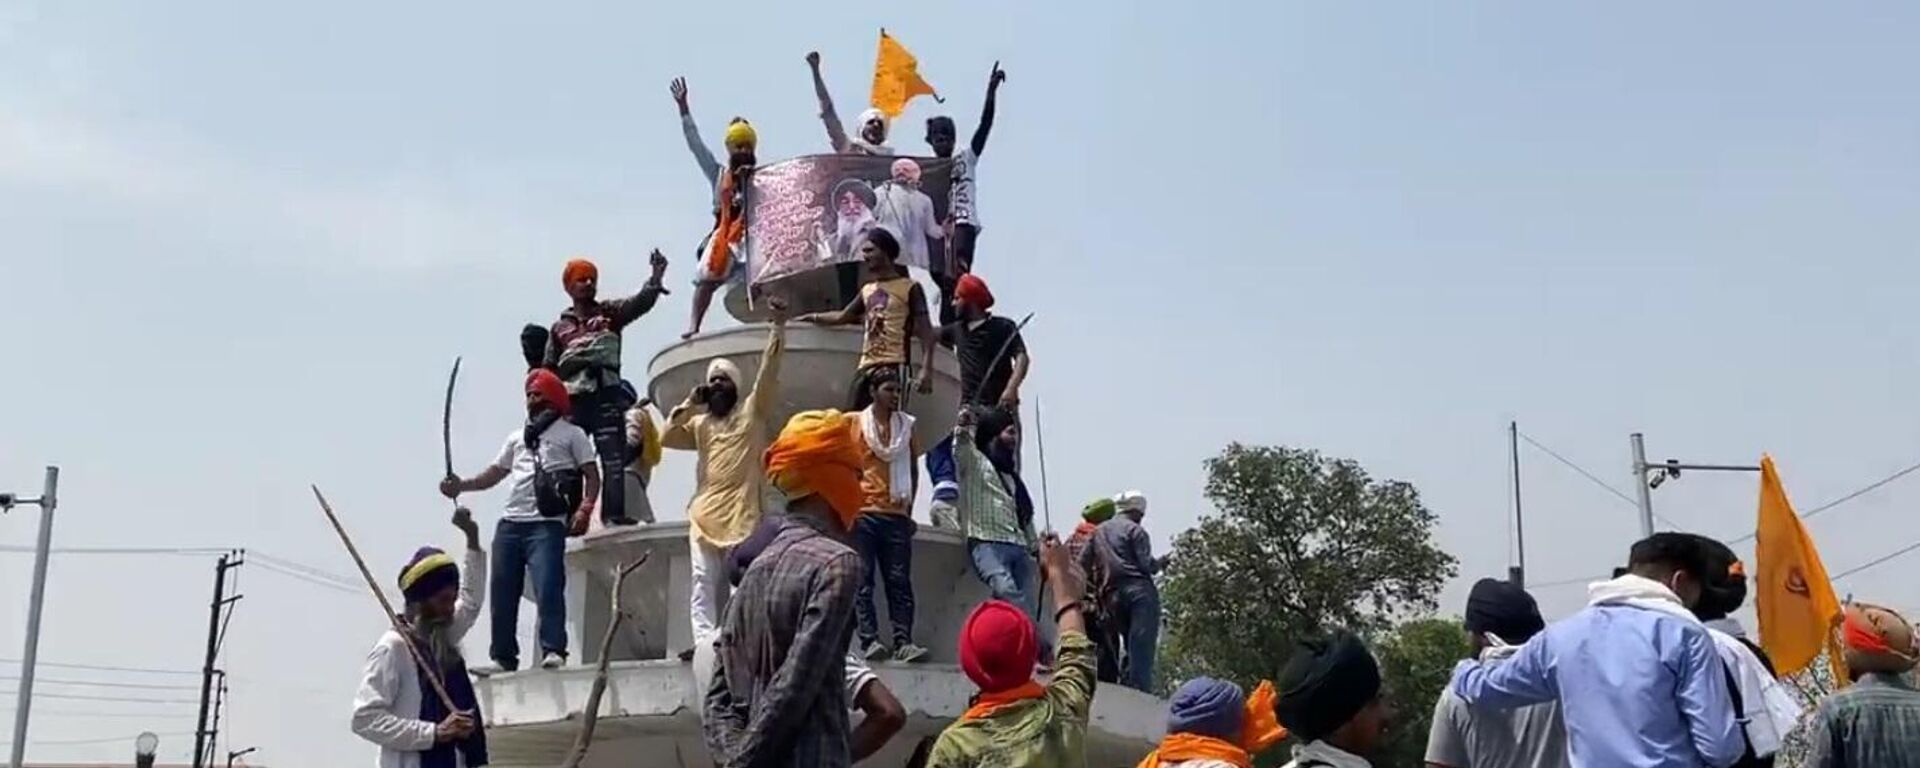 Open call for Khalistan in Patiala, Punjab! Hindu Nationalists and Khalistan supporting Sikhs have clashed today in India and the Khalistan movement is not anymore limited to a group of Sikhs in Canada or UK! - Sputnik International, 1920, 23.09.2022